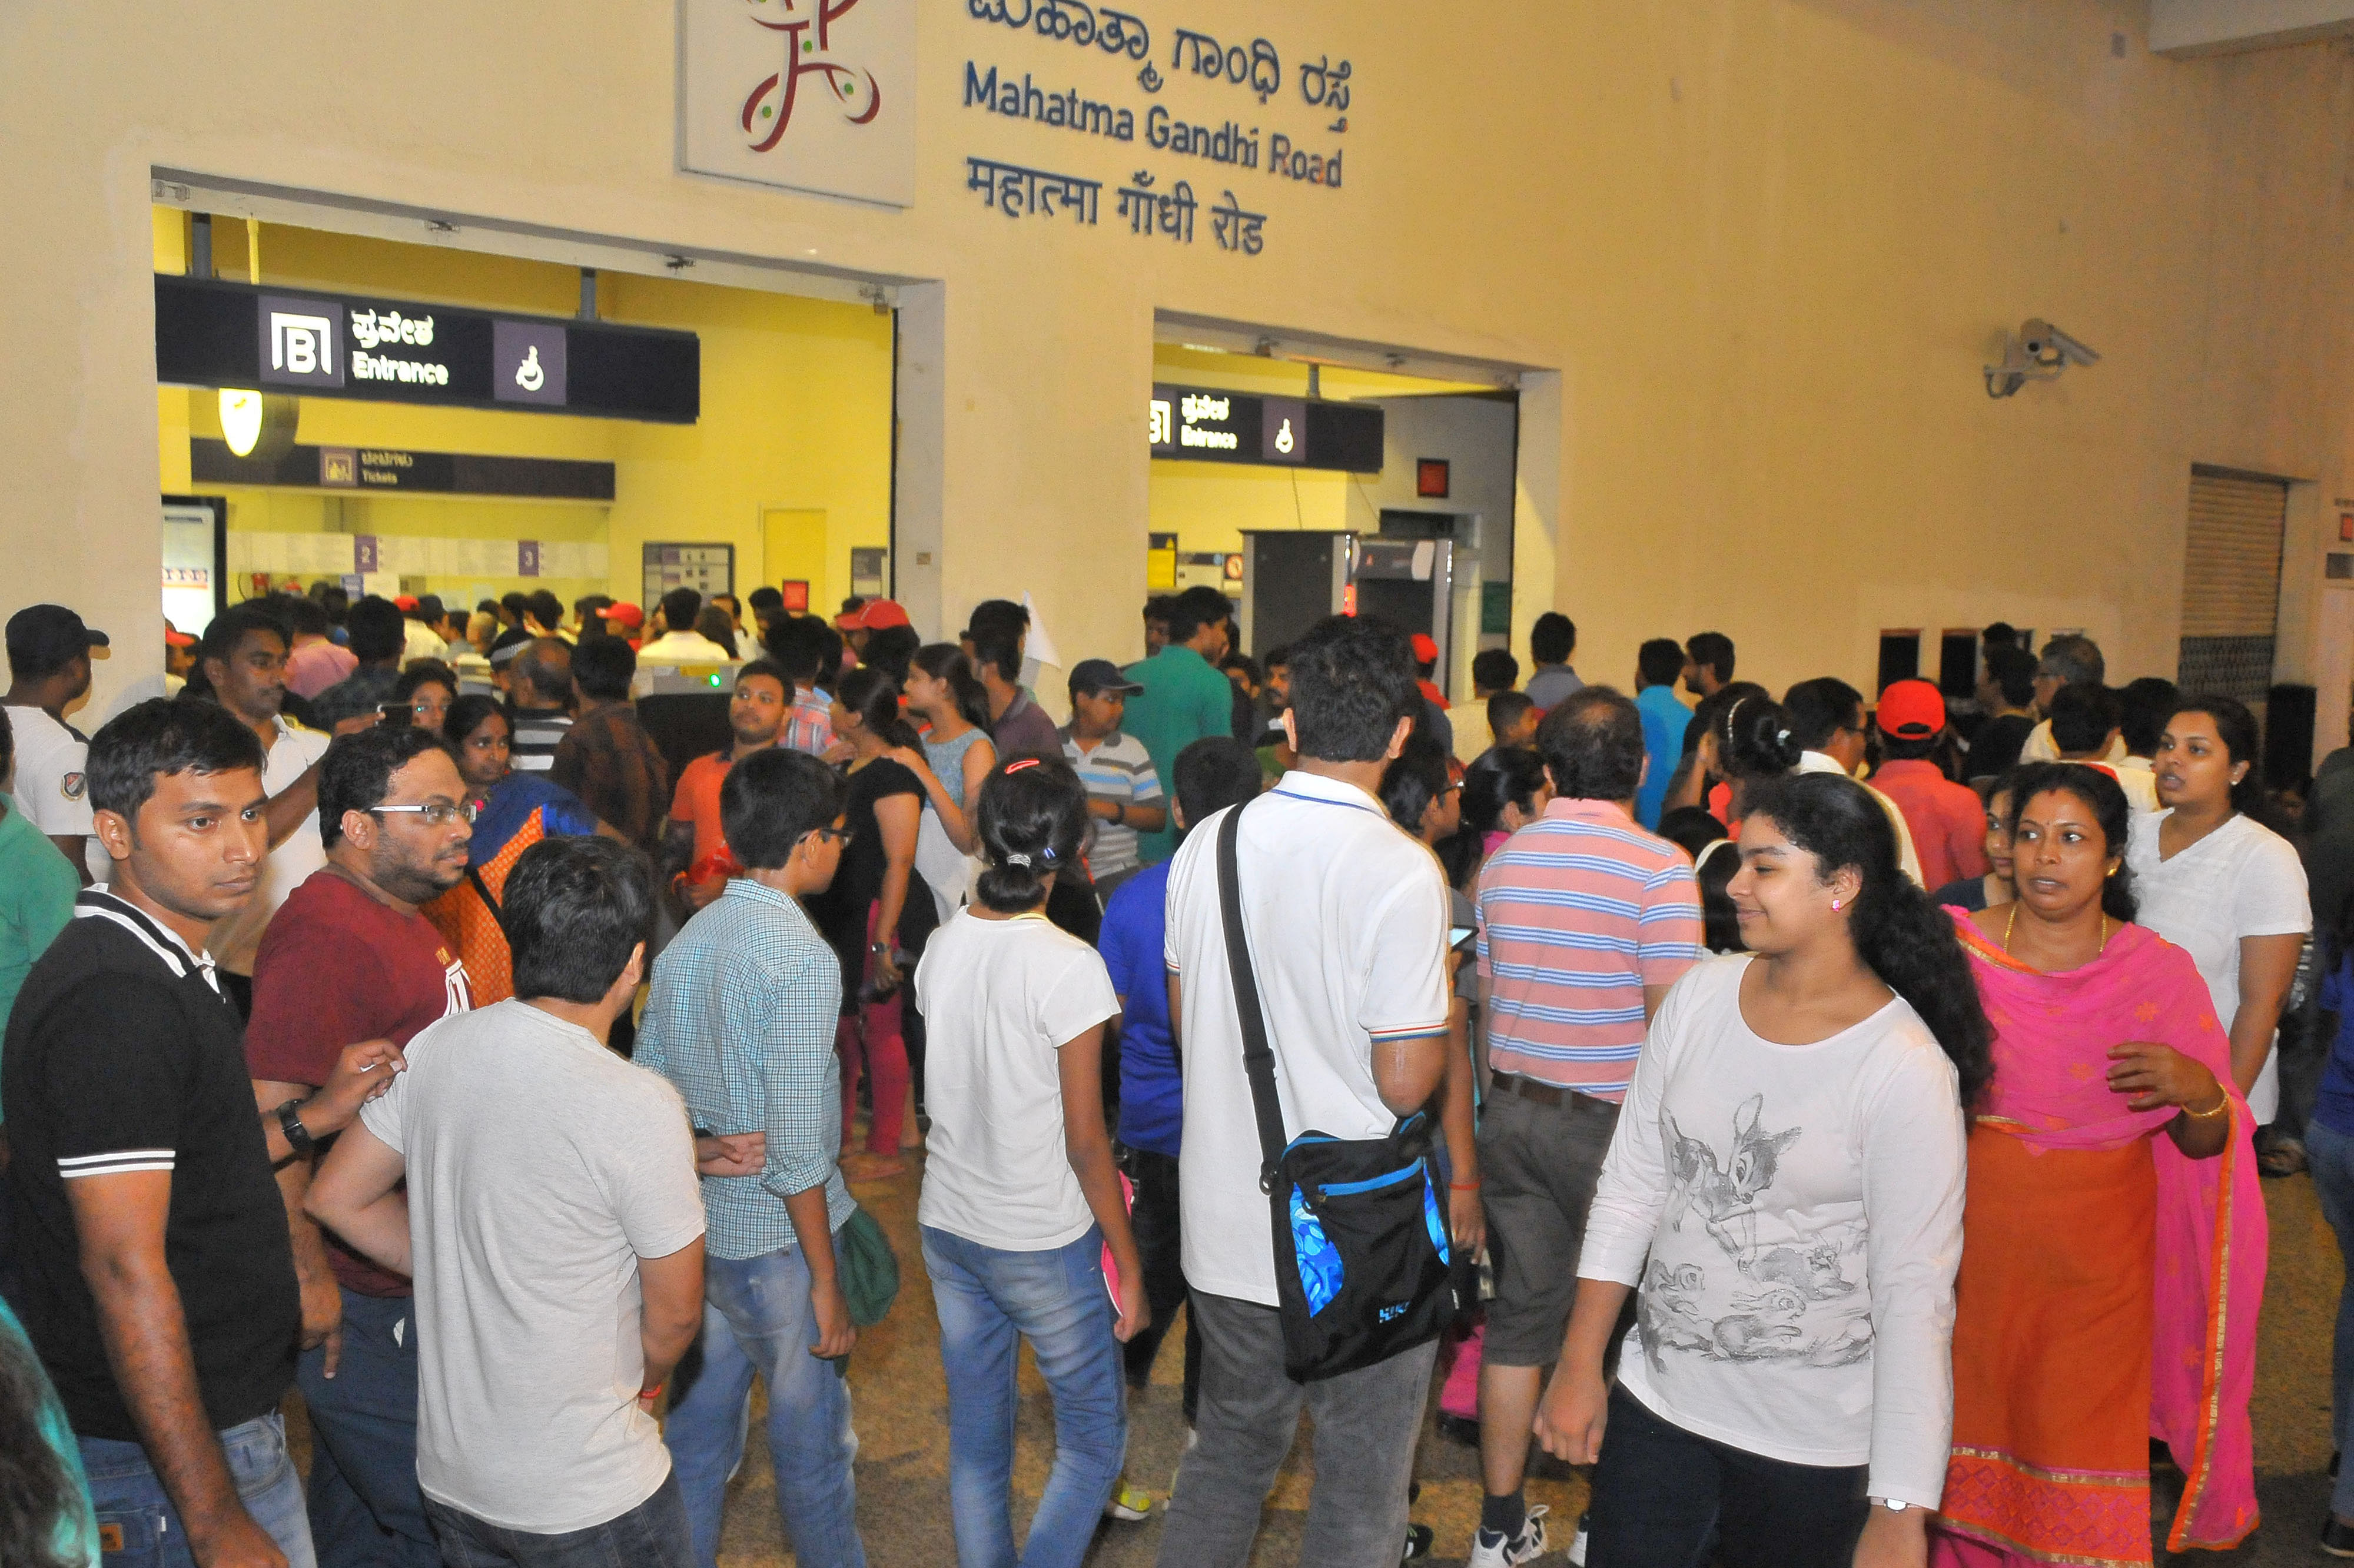 Several thousand commuters throng the MG Road Metro station, and the crowds are bigger on weekends.